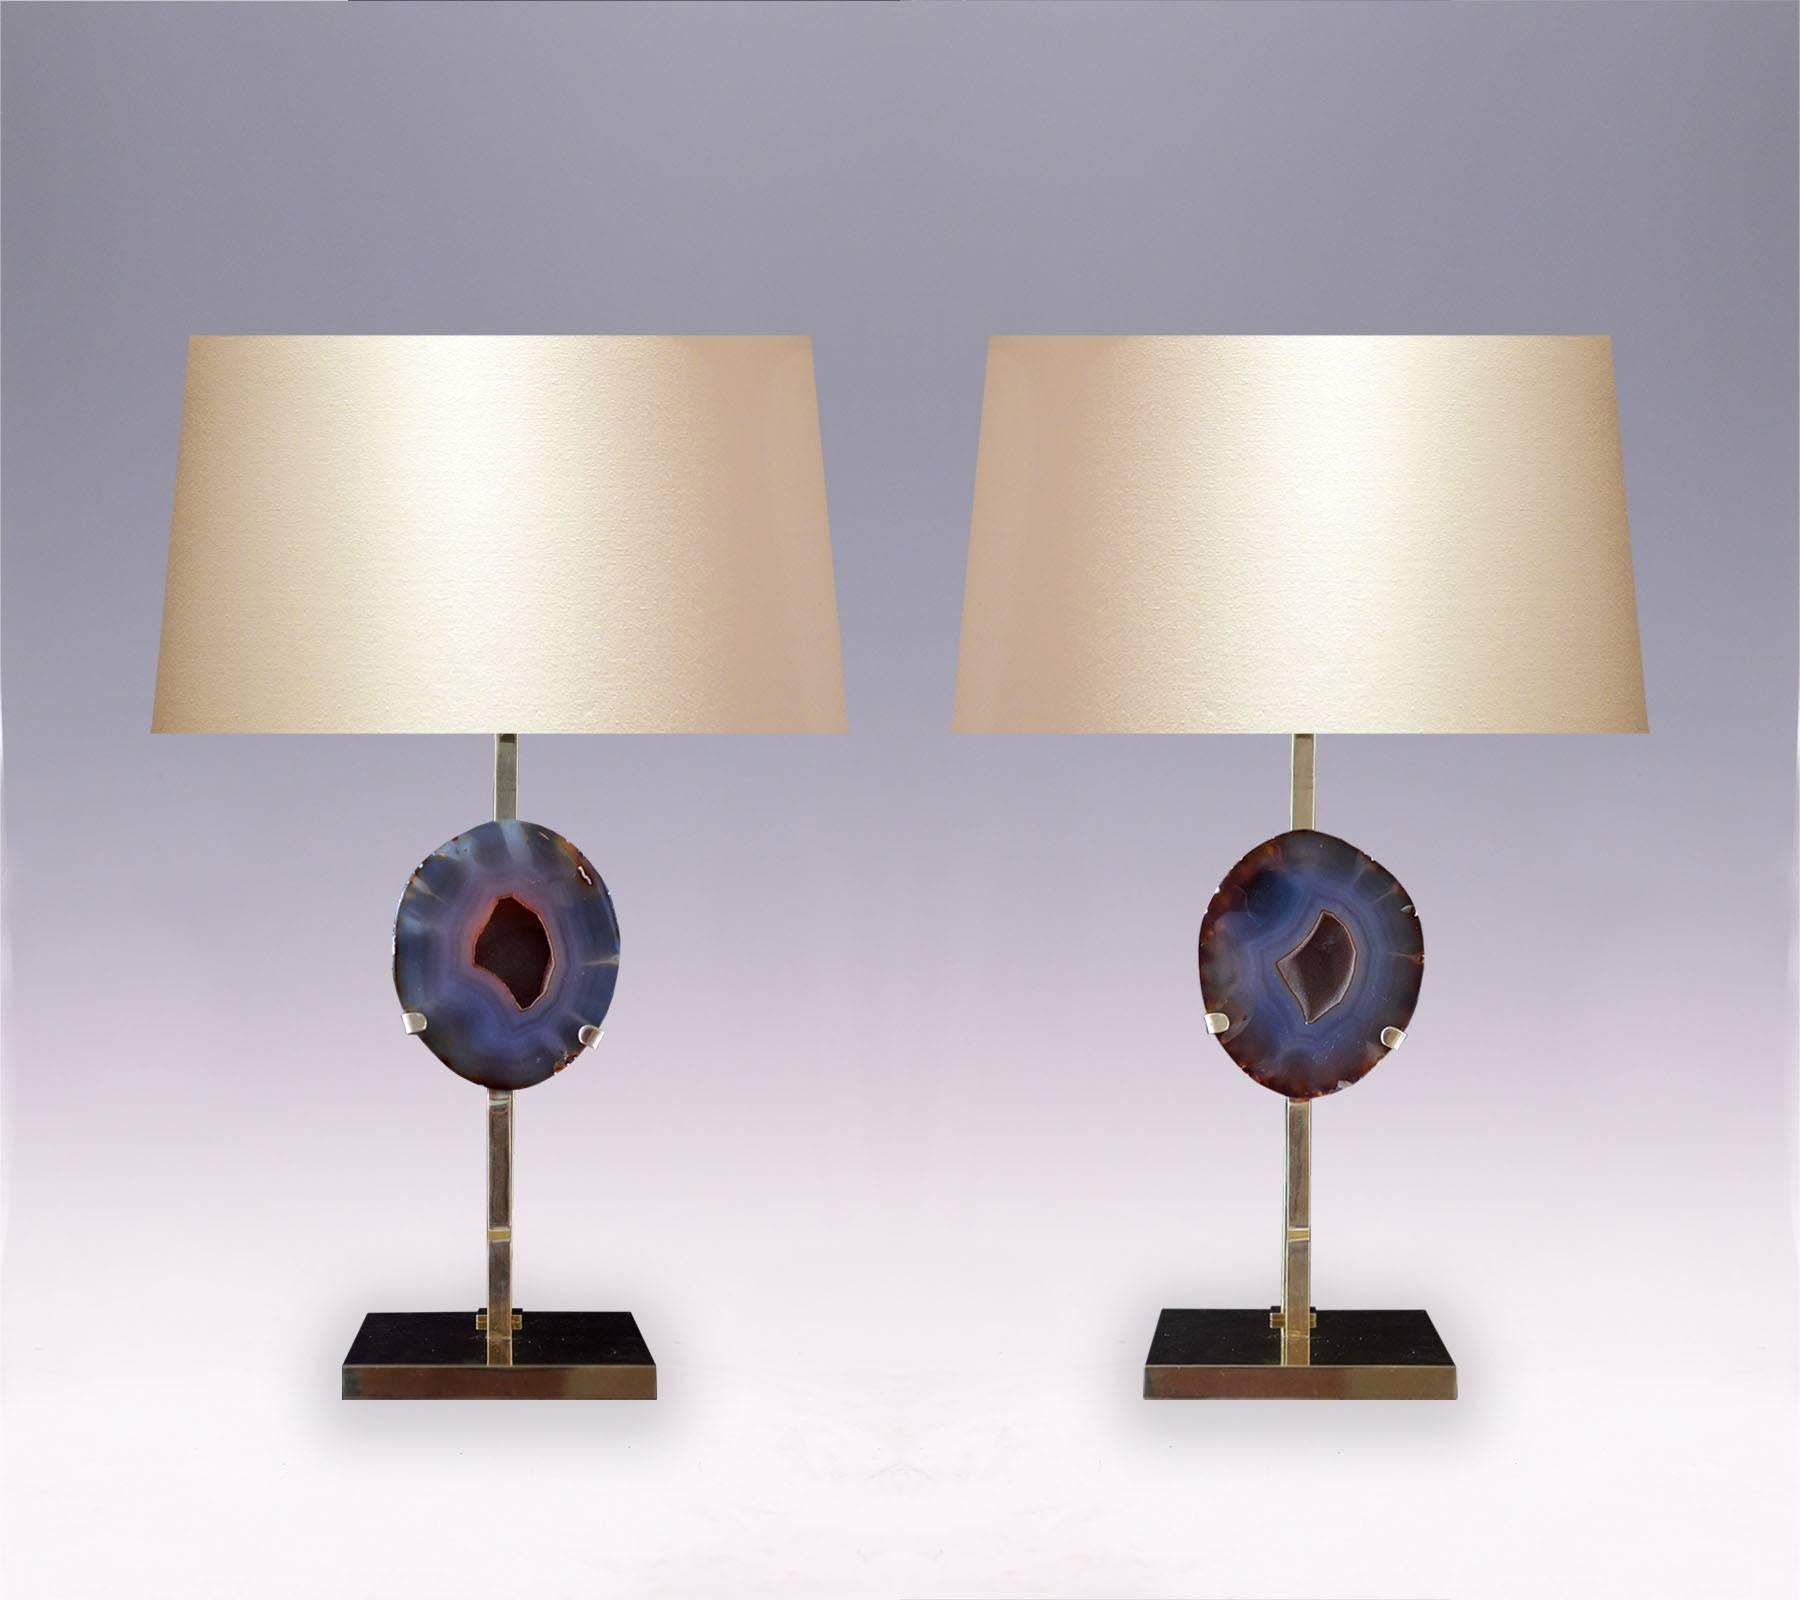 A pair of natural rare agate lamps with polished brass mount.
(Lampshade not included)
